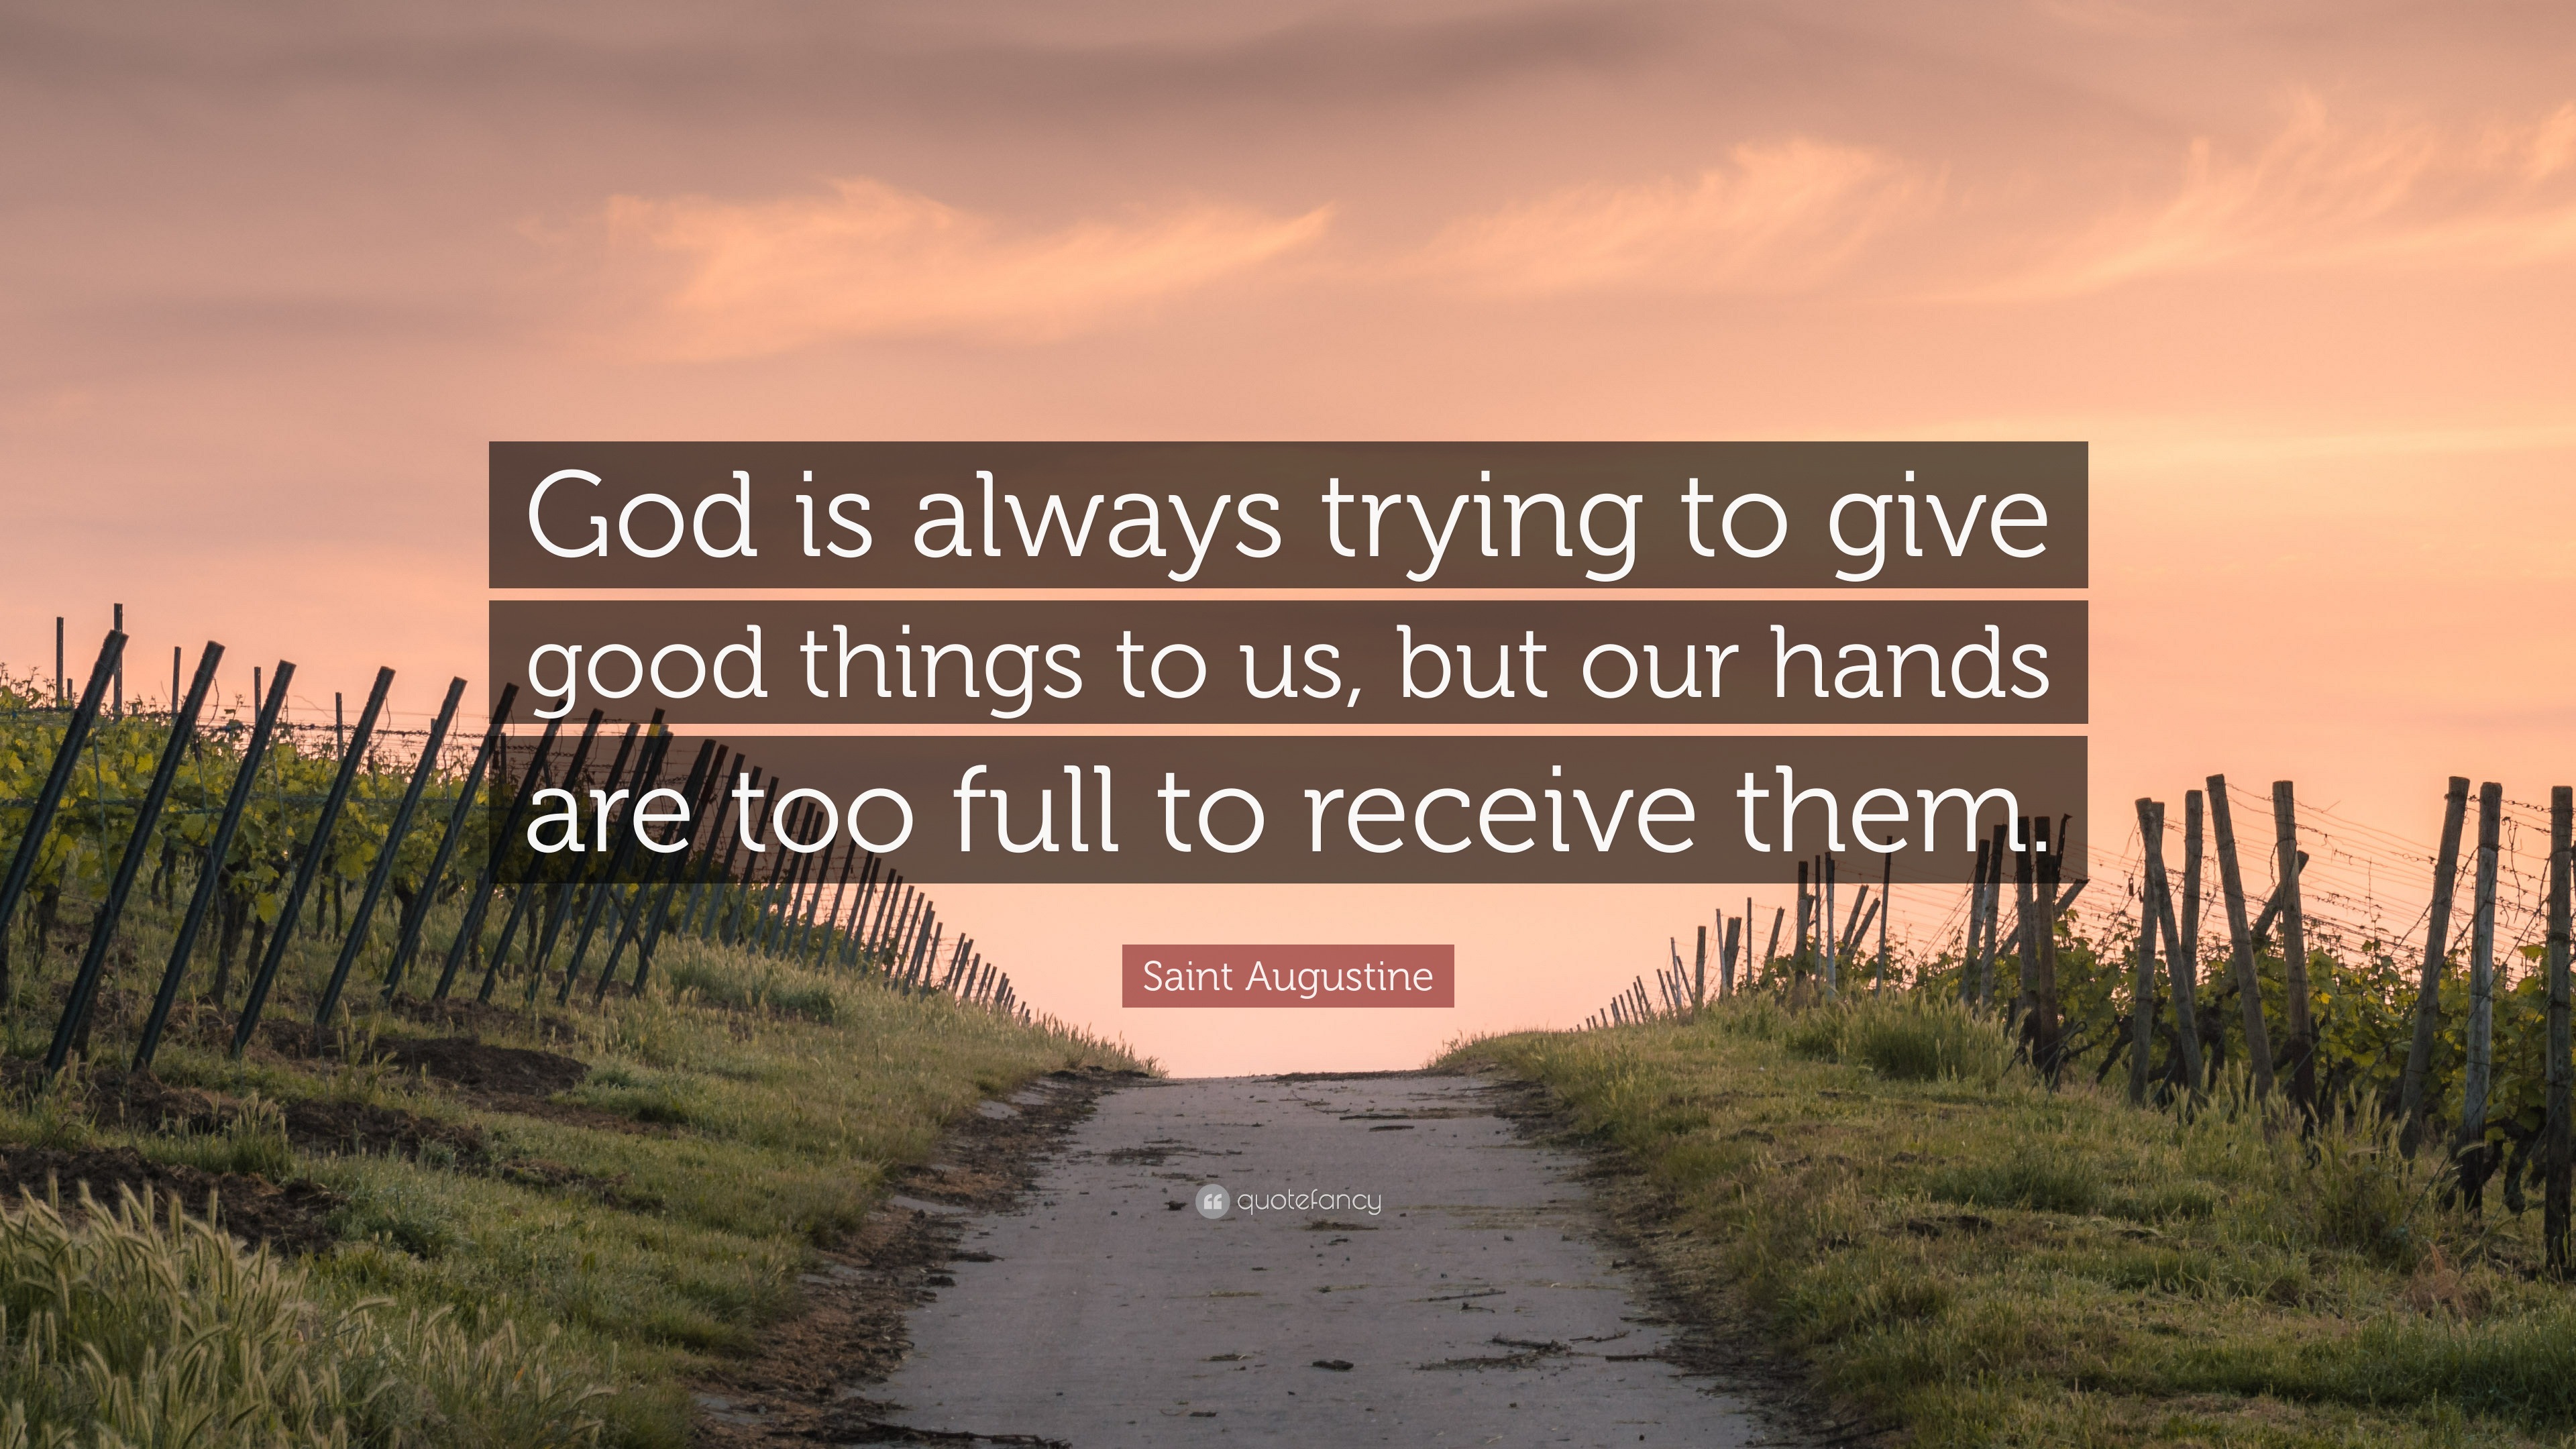 Saint Augustine Quote: “God is always trying to give good things to us ...